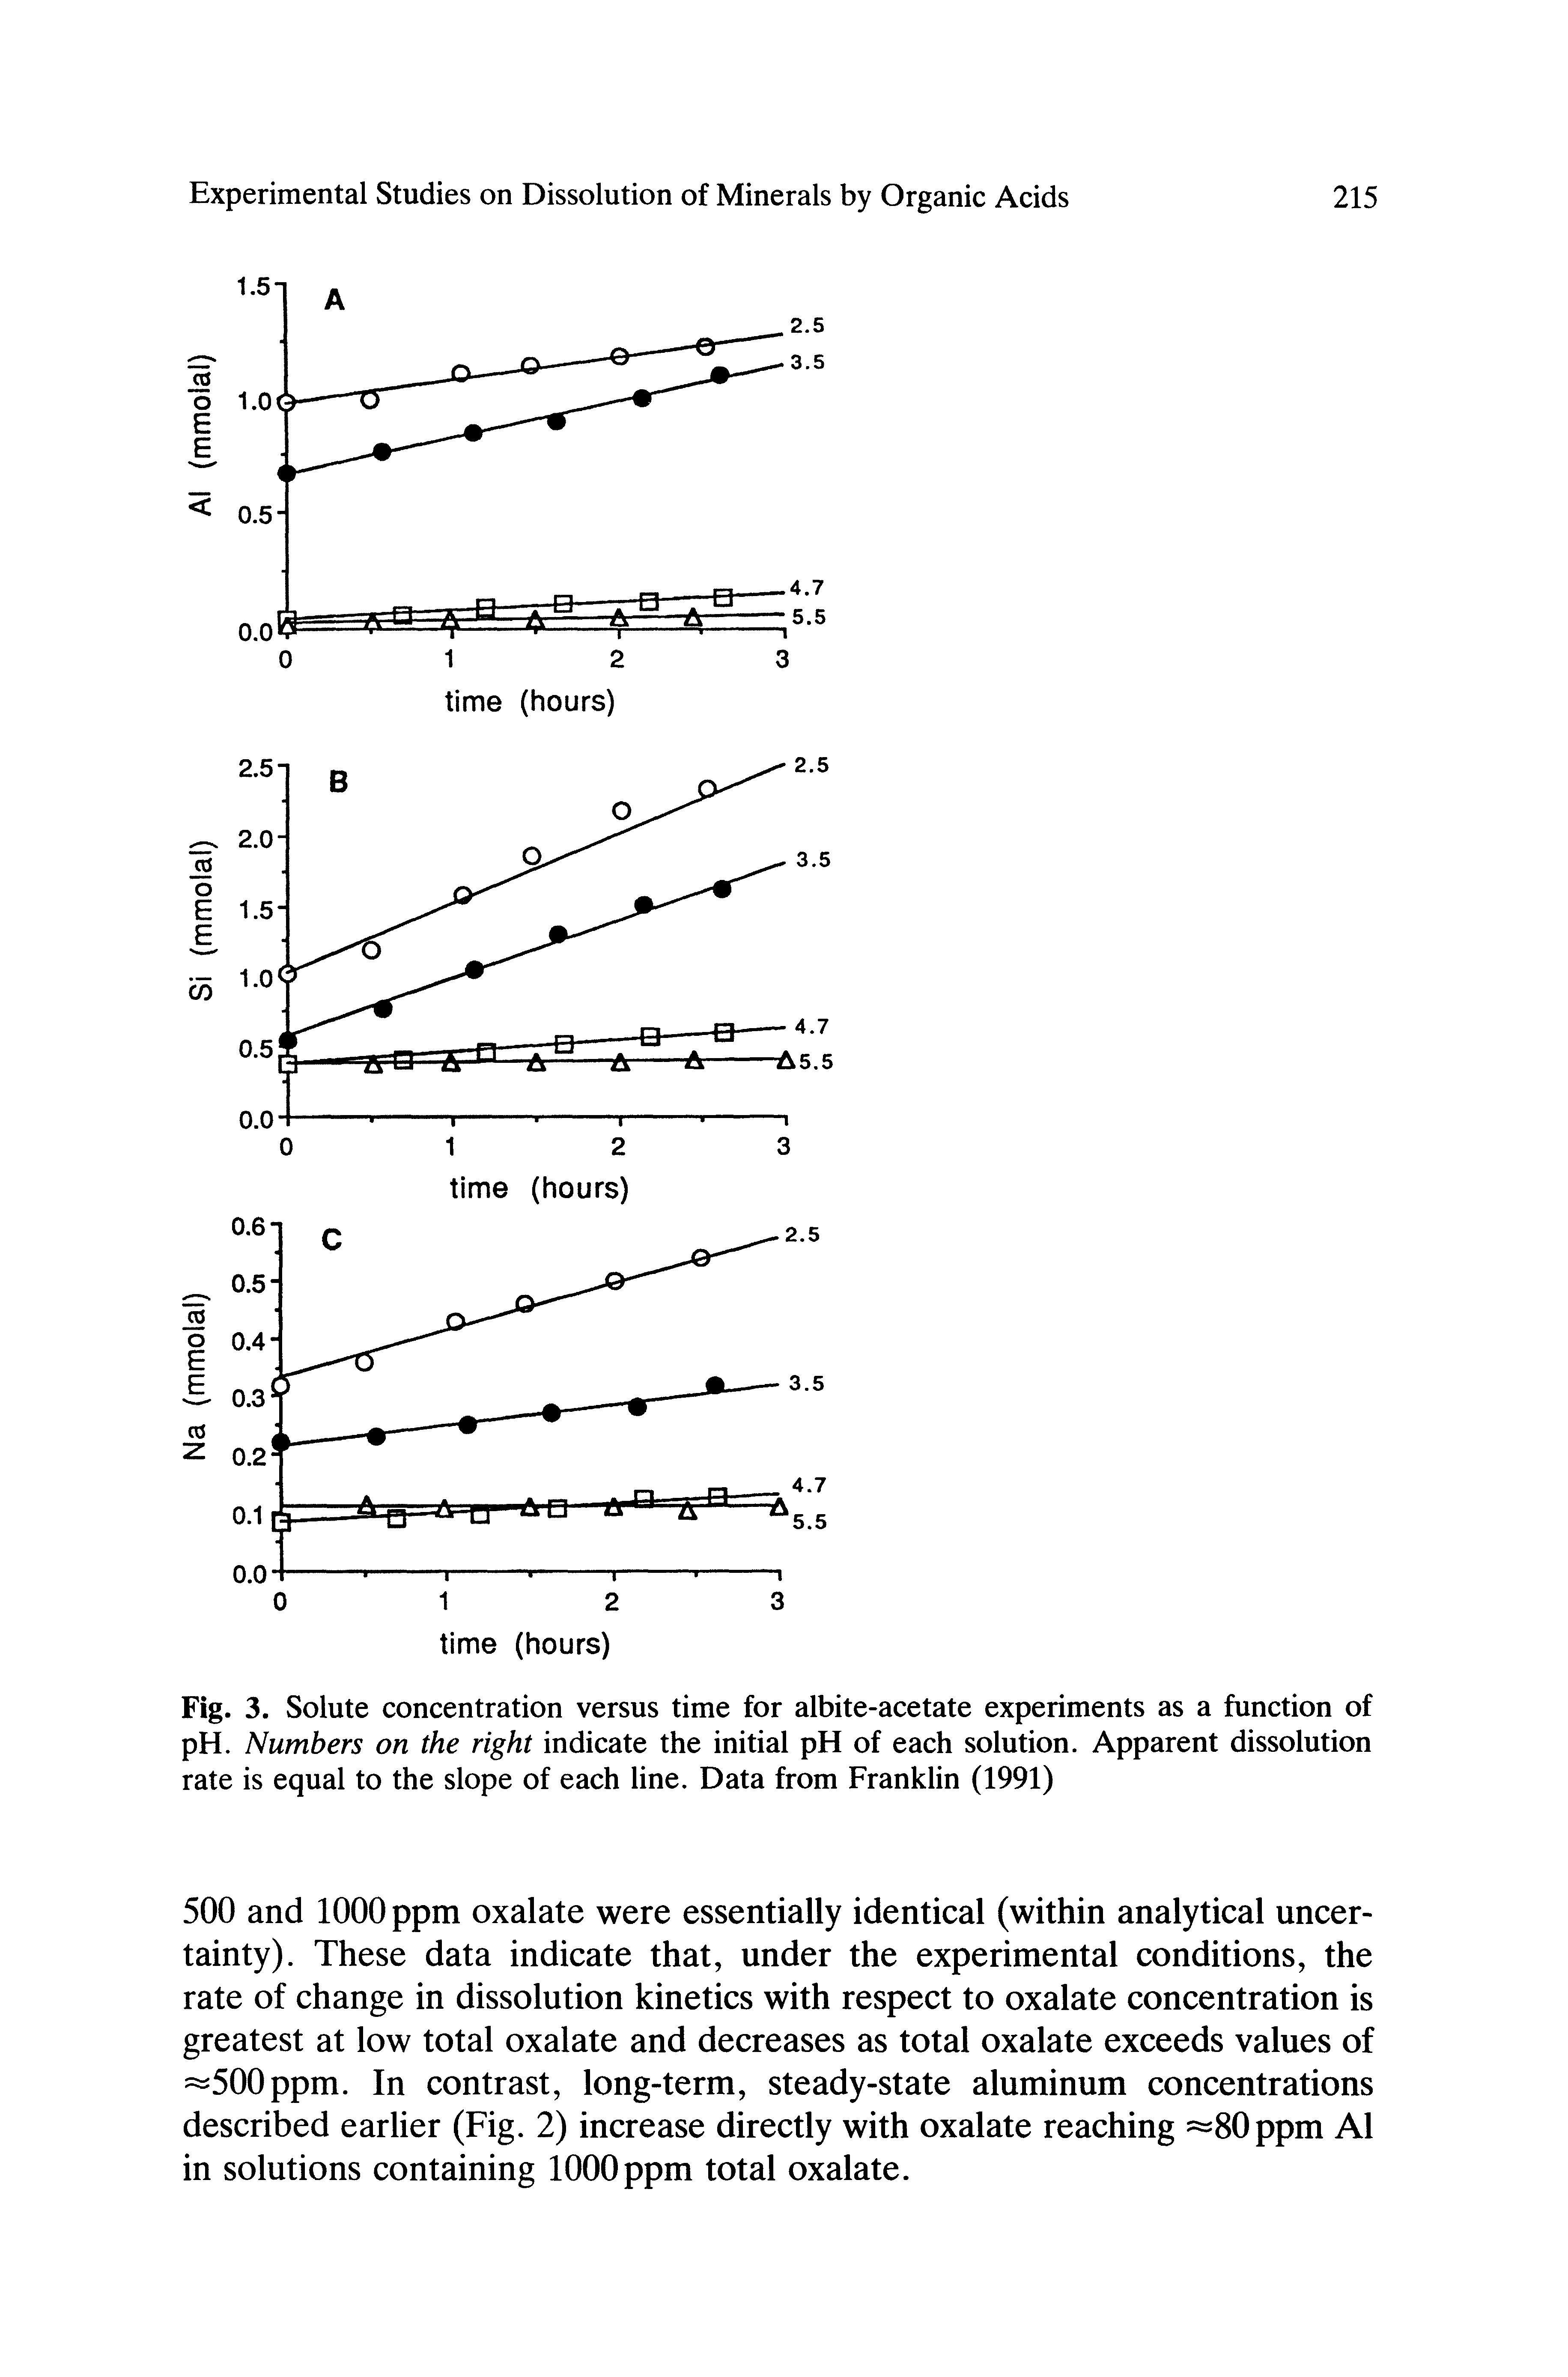 Fig. 3. Solute concentration versus time for albite-acetate experiments as a function of pH. Numbers on the right indicate the initial pH of each solution. Apparent dissolution rate is equal to the slope of each line. Data from Franklin (1991)...